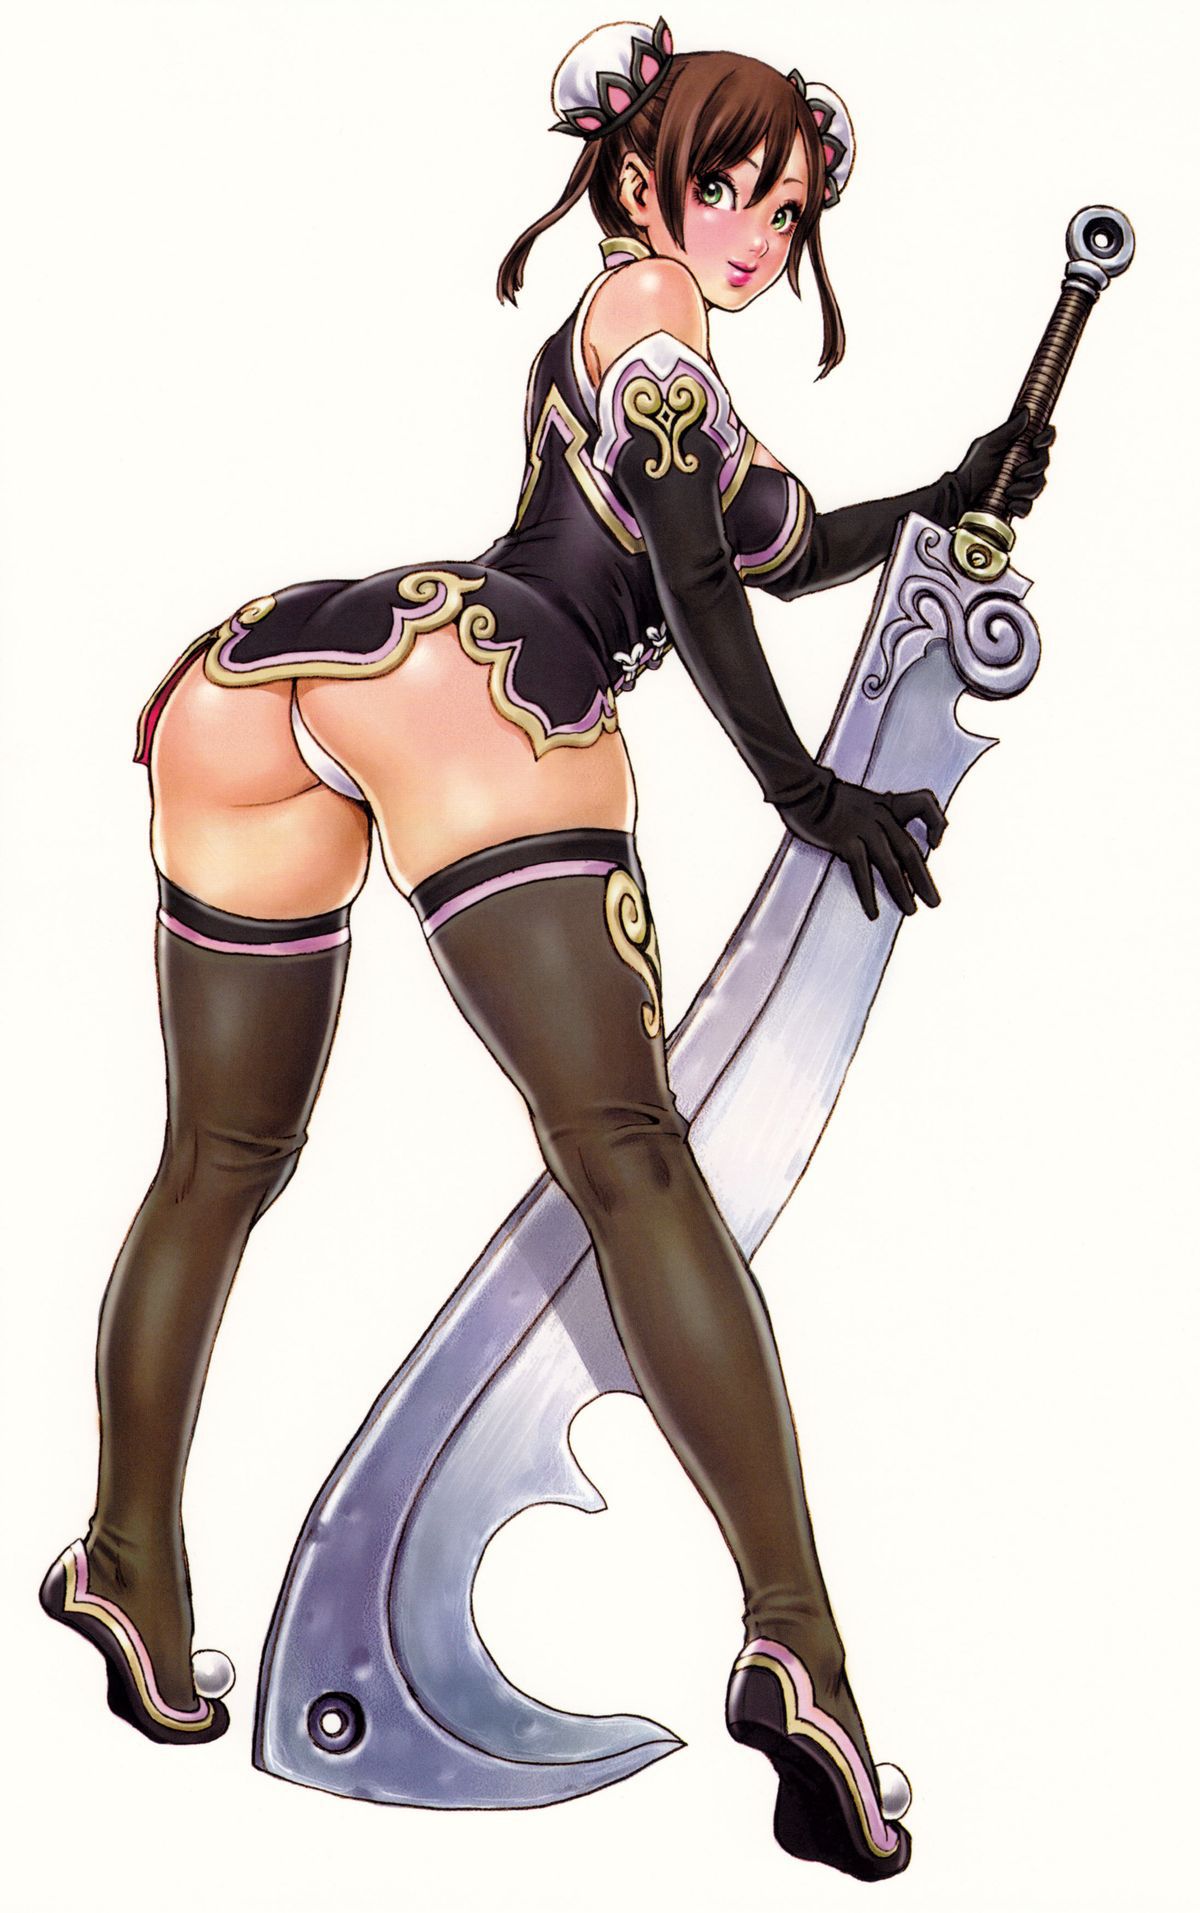 e-jack's Ecchi (with weapons) Gallery - Sourced 39